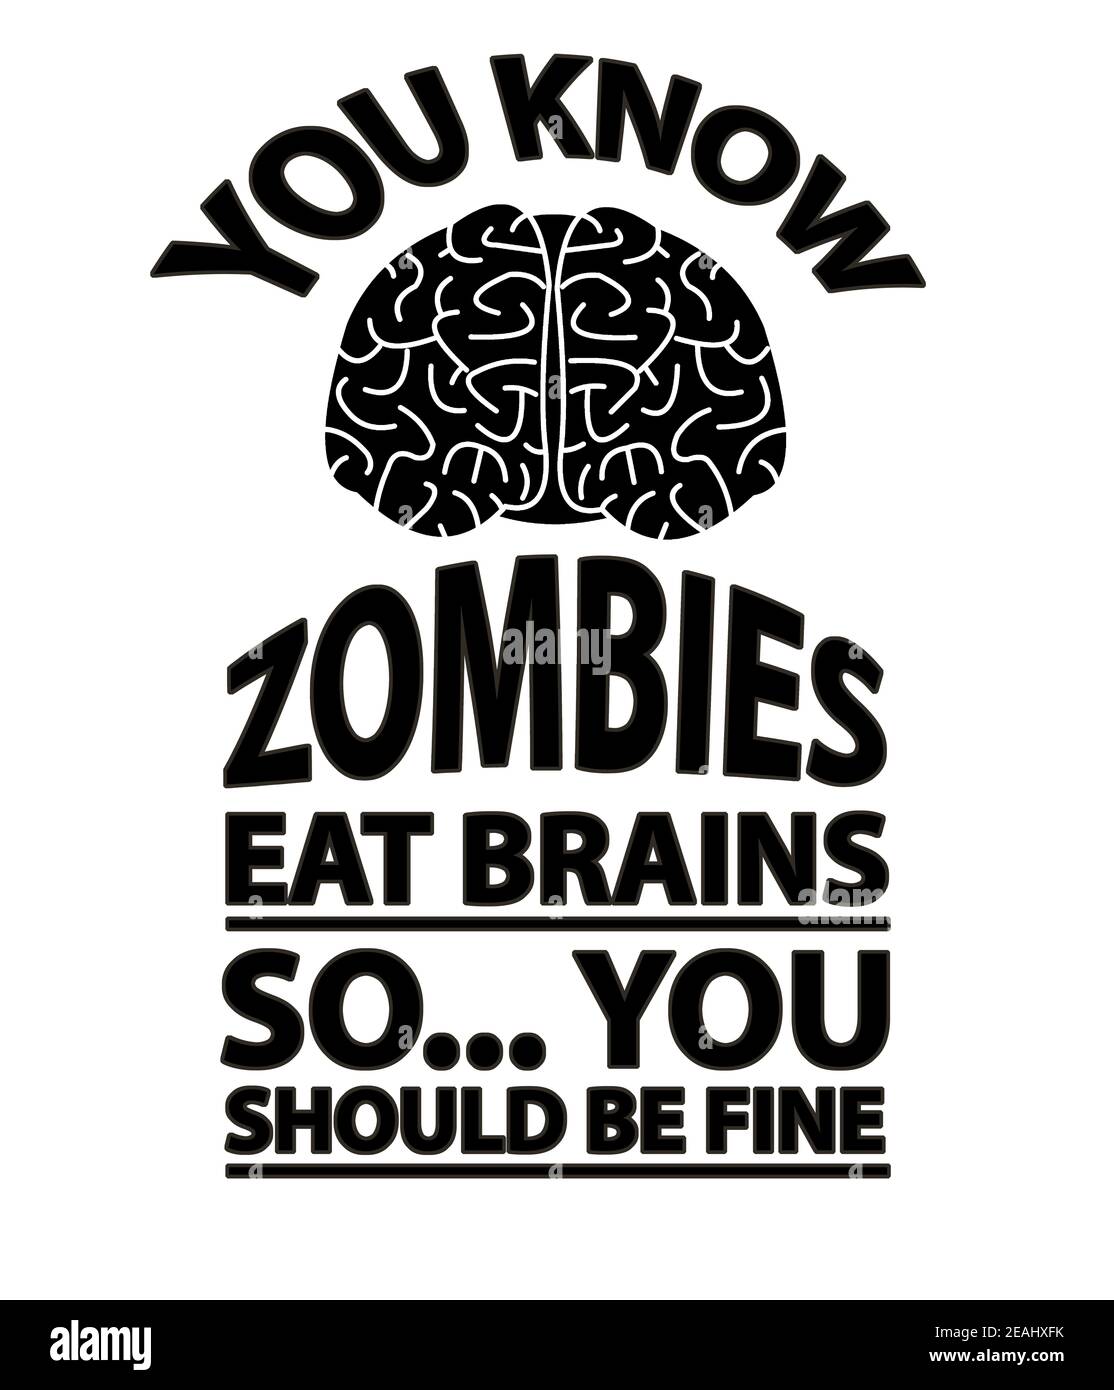 Look Out - Zombies Eat Brains Joke Stock Photo